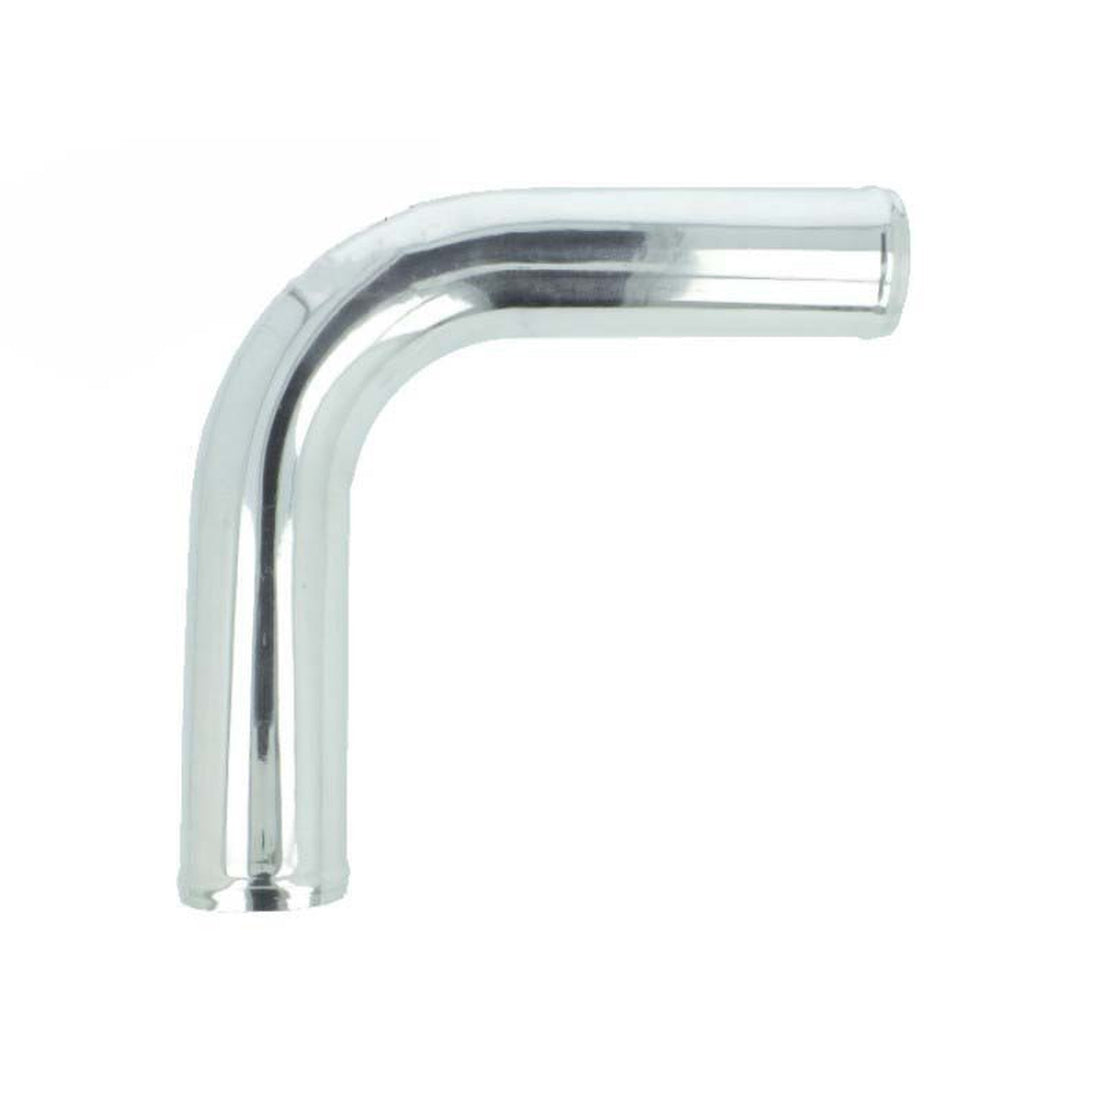 BOOST Products Aluminum Elbow 90 Degrees with 2-1/2" OD, Mandrel Bent, Polished